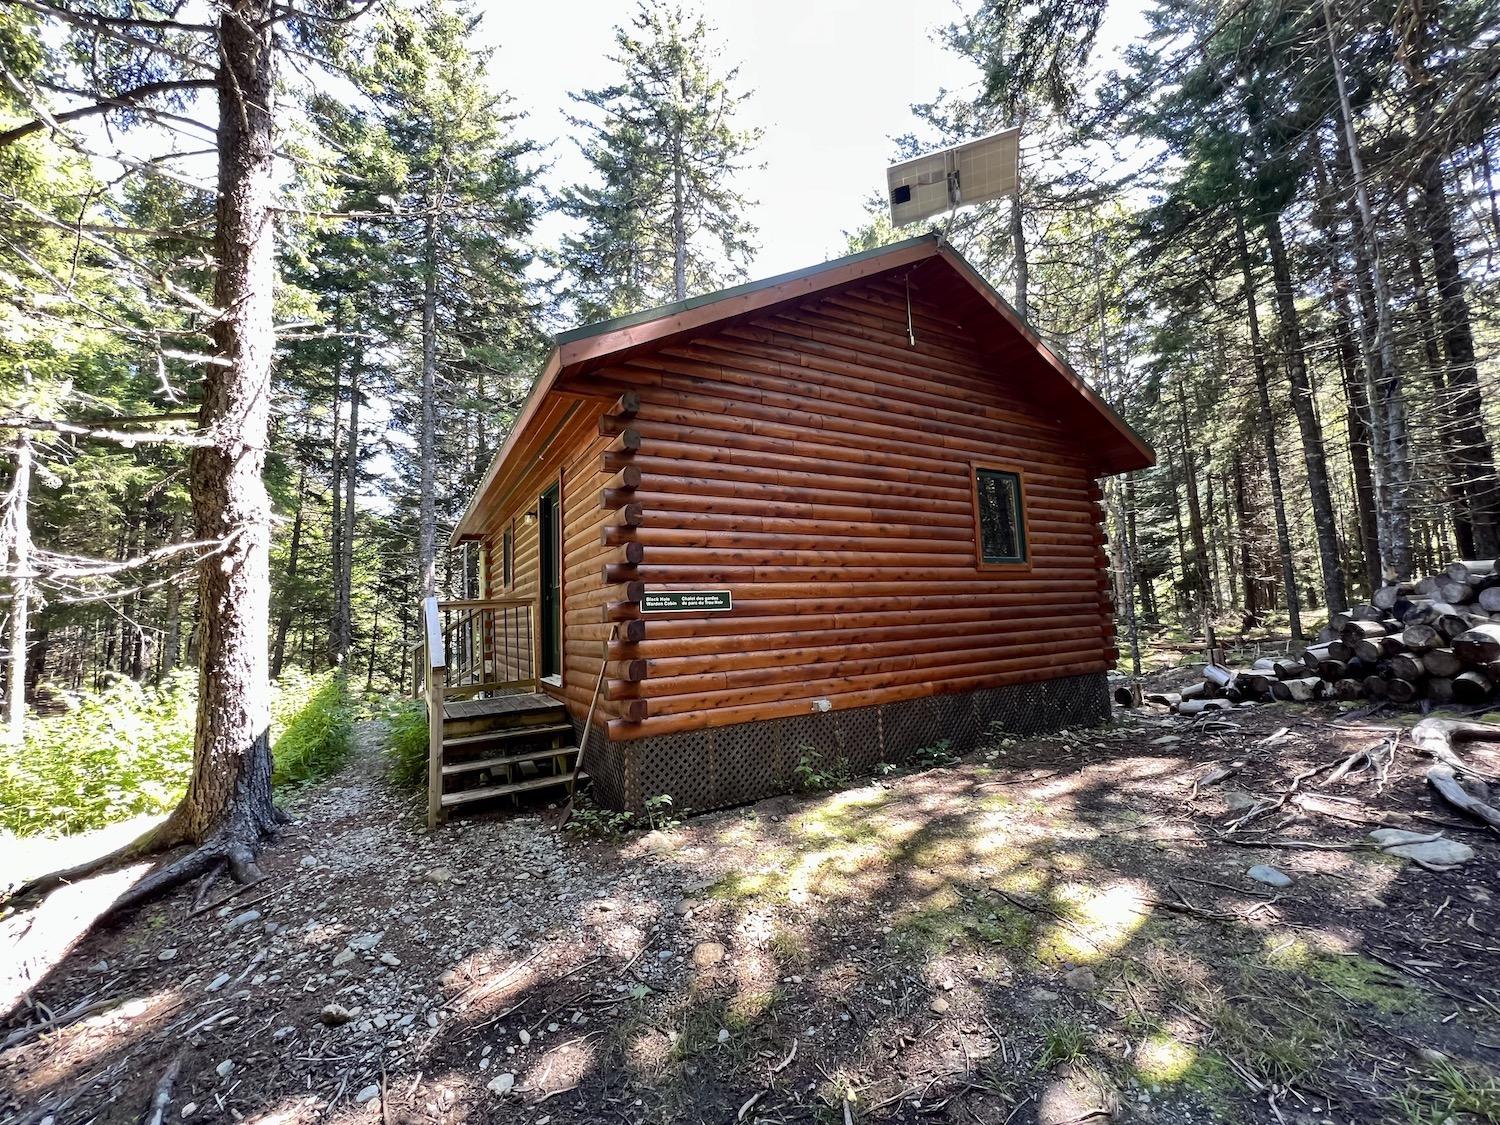 At Black Hole, there's a Parks Canada warden cabin, now called a research cabin.